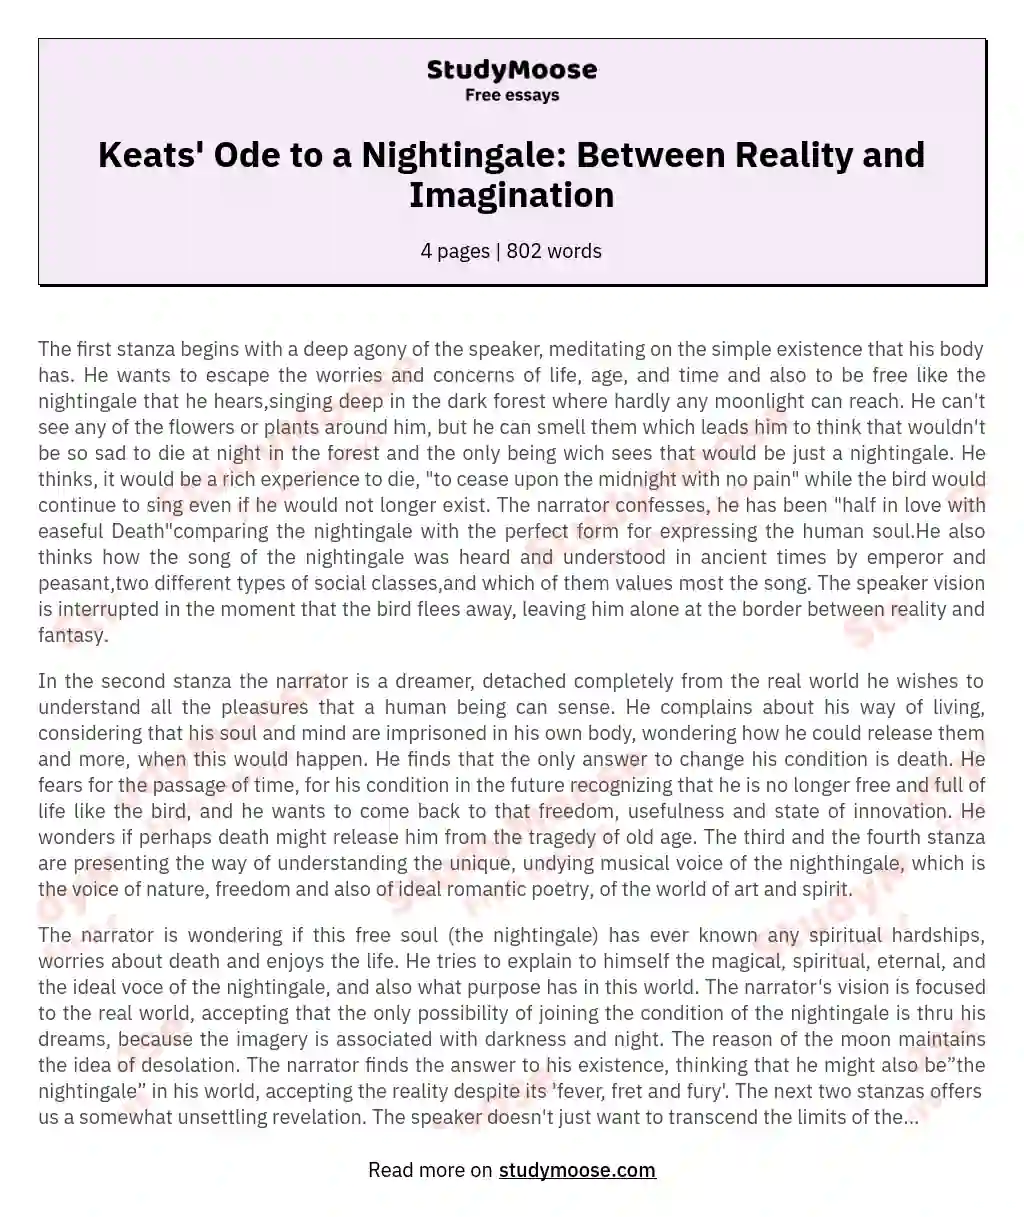 Keats' Ode to a Nightingale: Between Reality and Imagination essay